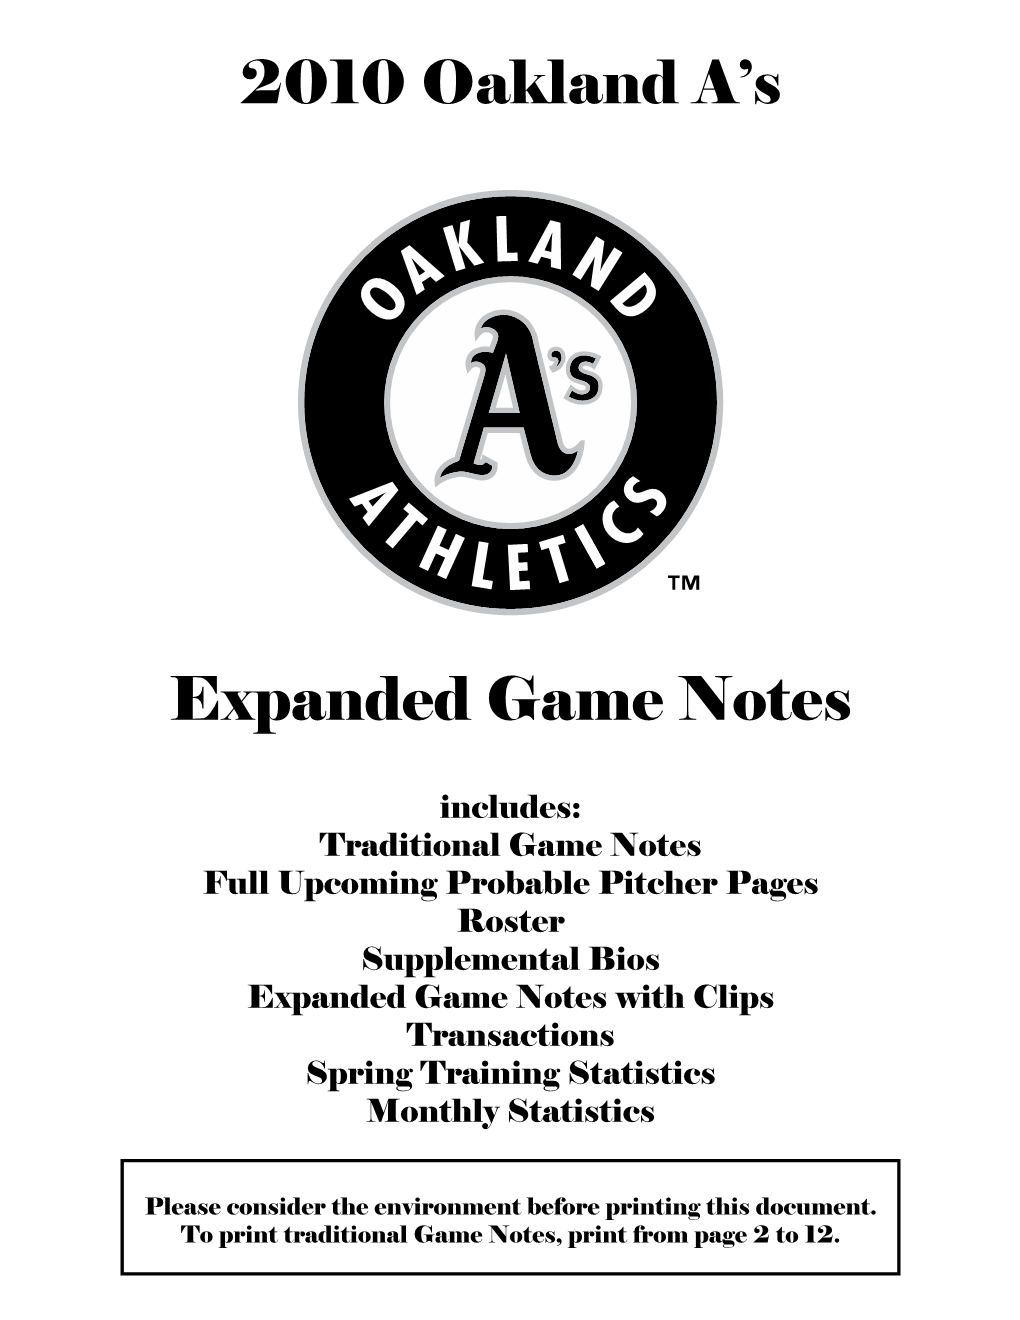 2010 Oakland A's Expanded Game Notes